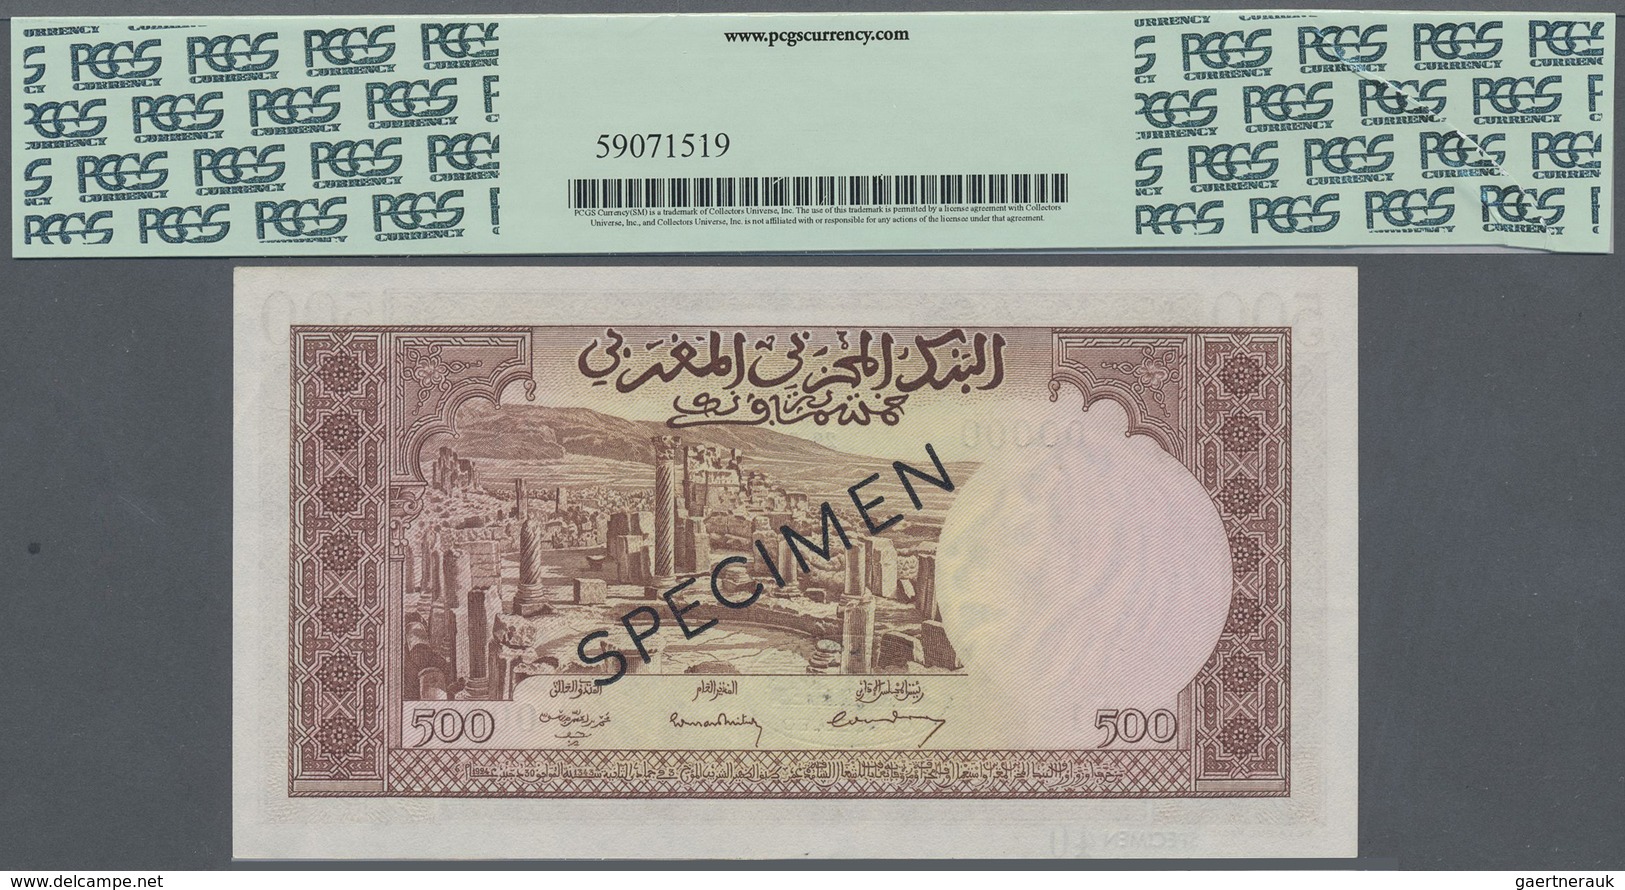 Morocco / Marokko: 500 Francs 1951 Specimen, Unissued Type, P. 45Bs, PCGS Graded 58PPQ Choice About - Morocco